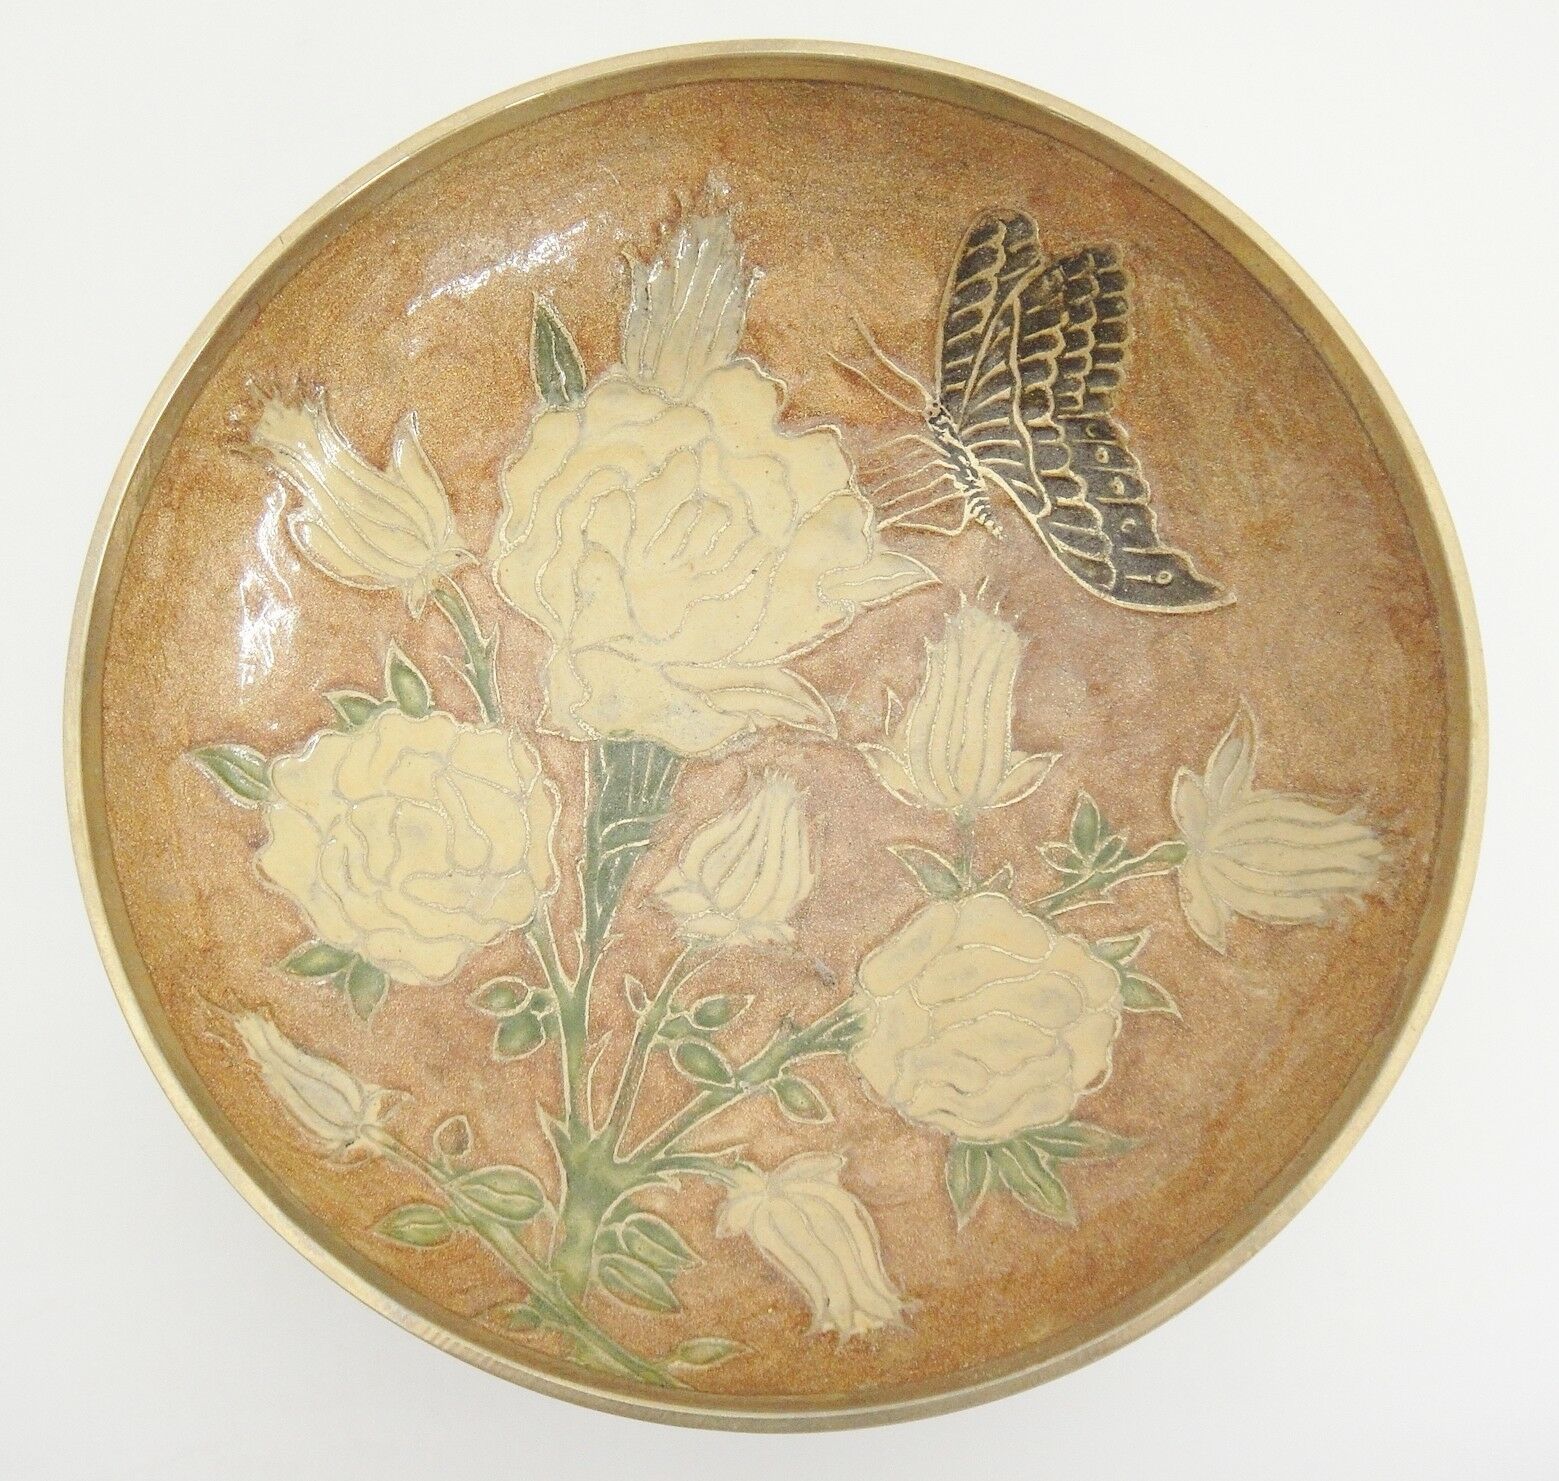 Primary image for Brass Bowl Cloisonne Enamel Design Flowers Butterfly Copper Color Cream 6.75"